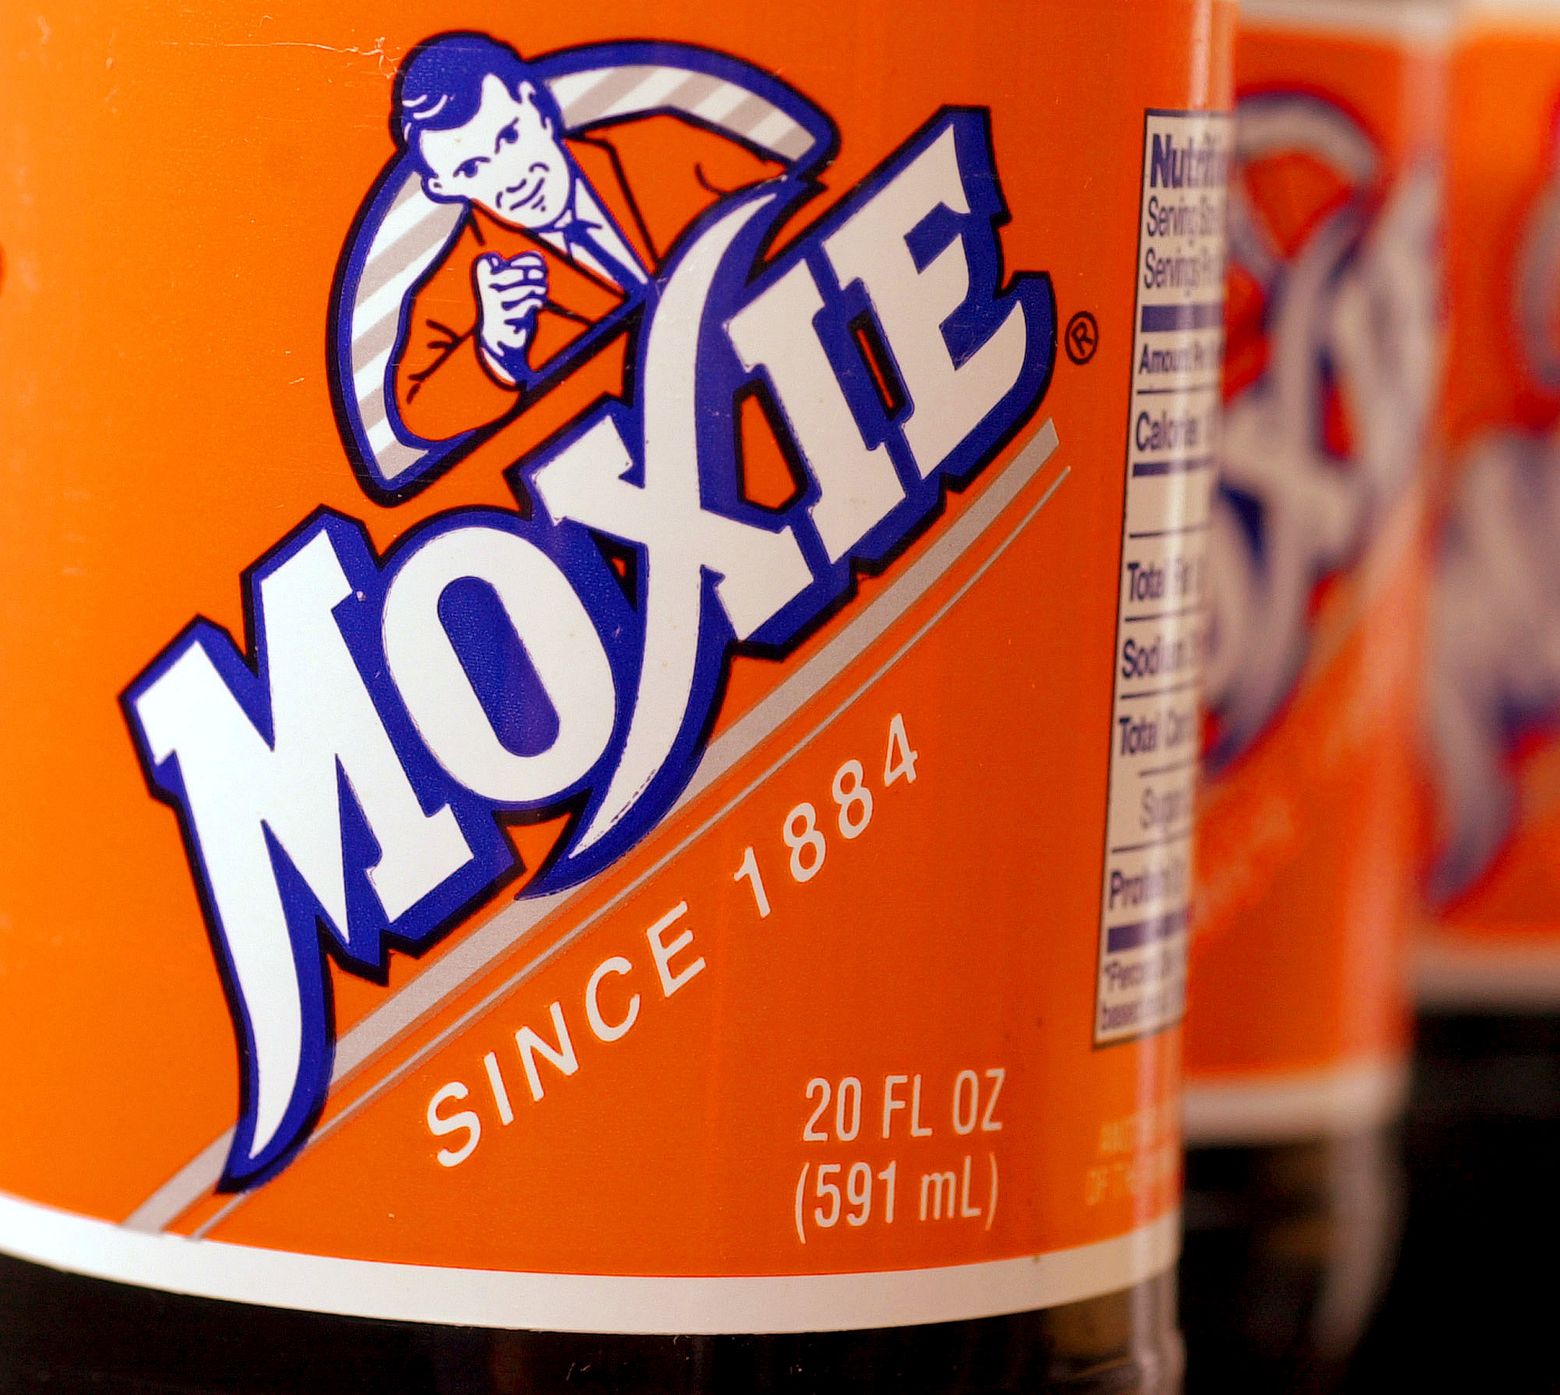 Moxie: Maine In A Bottle Book